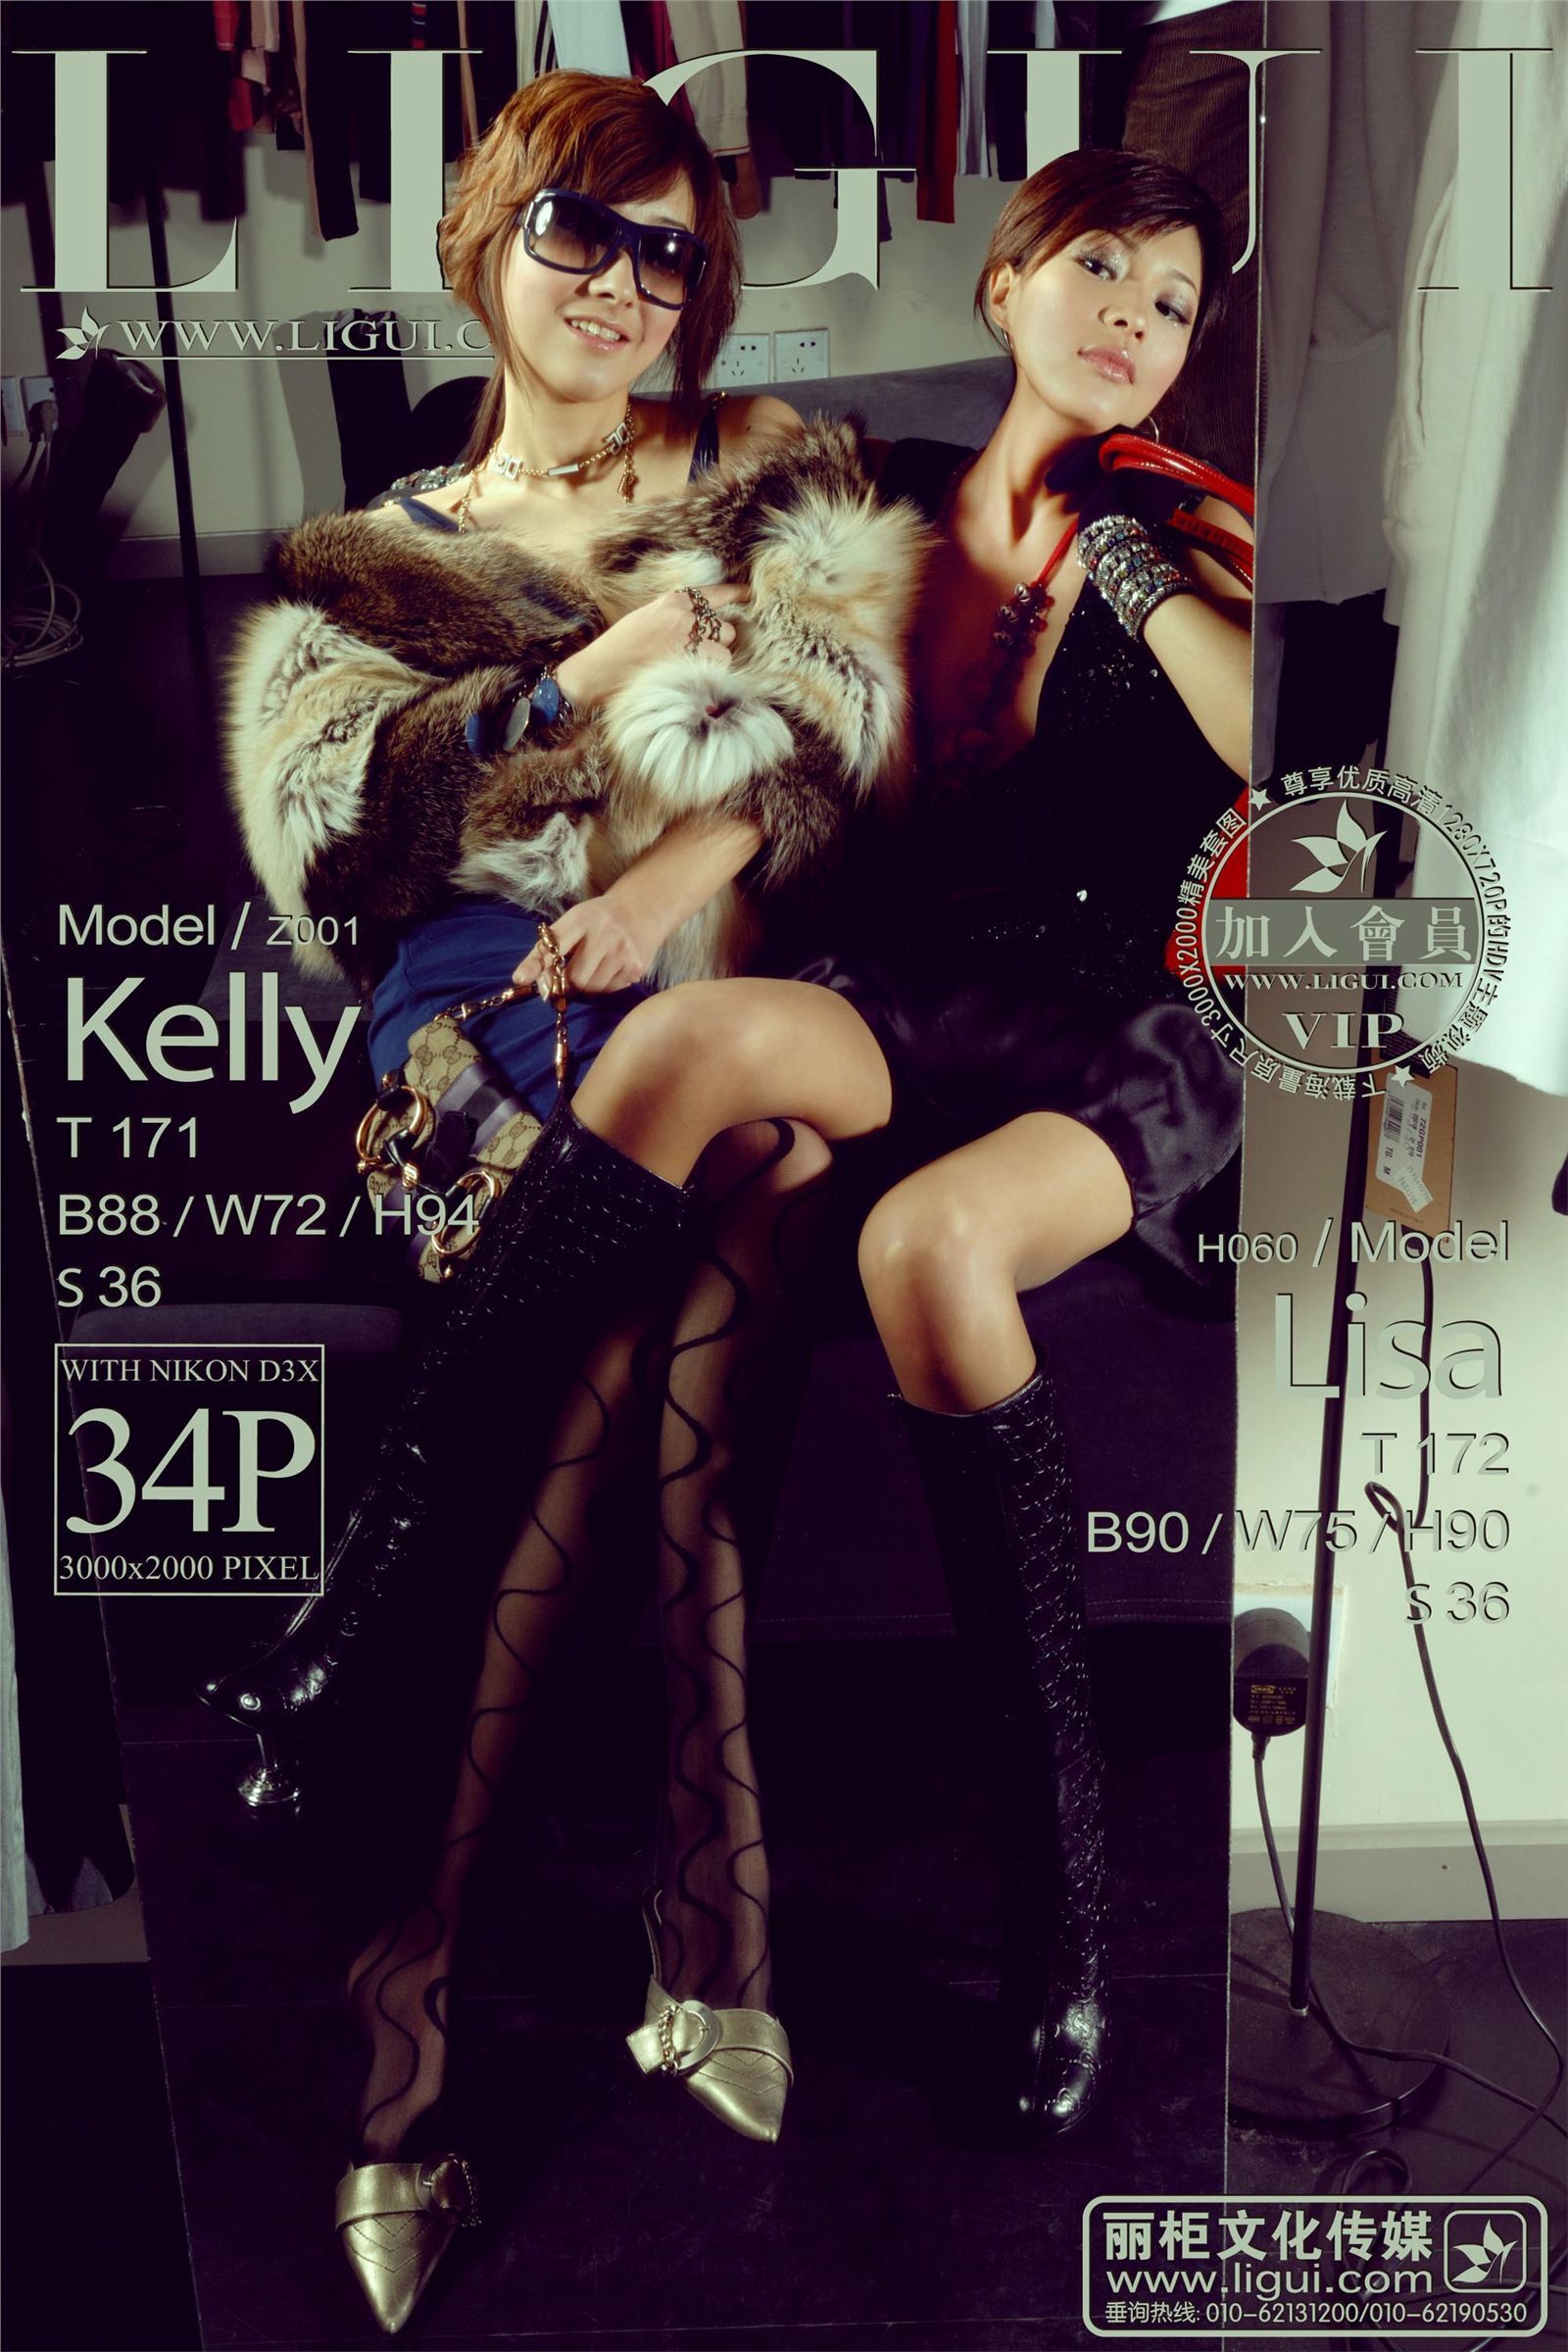 [Li cabinet] photos of Kelly Lisa's domestic beauties in Lotus magazine on March 19, 2013